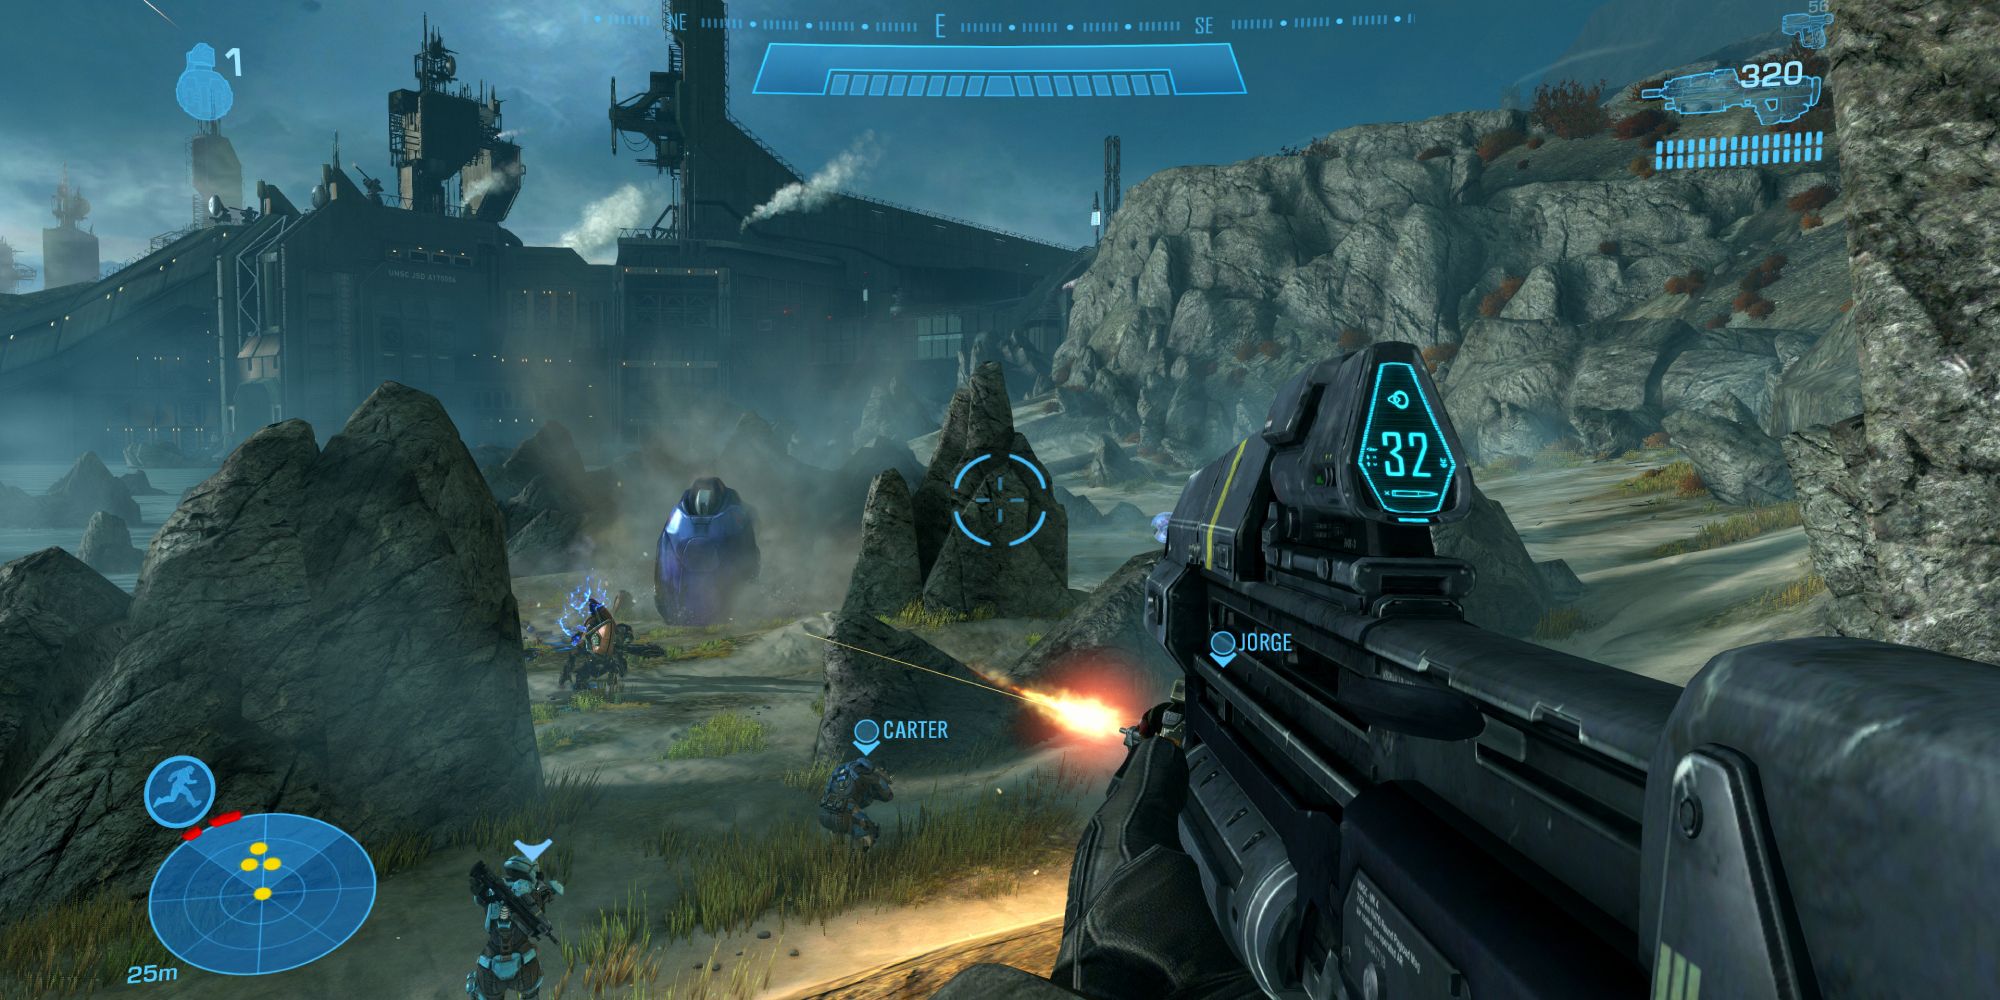 Best Fictional Planets a first-person perspective of Noble 6 in the game Halo Reach holding a MA40 AR overlooking a beach in which their fellow teammates are fighting the Covenant forces